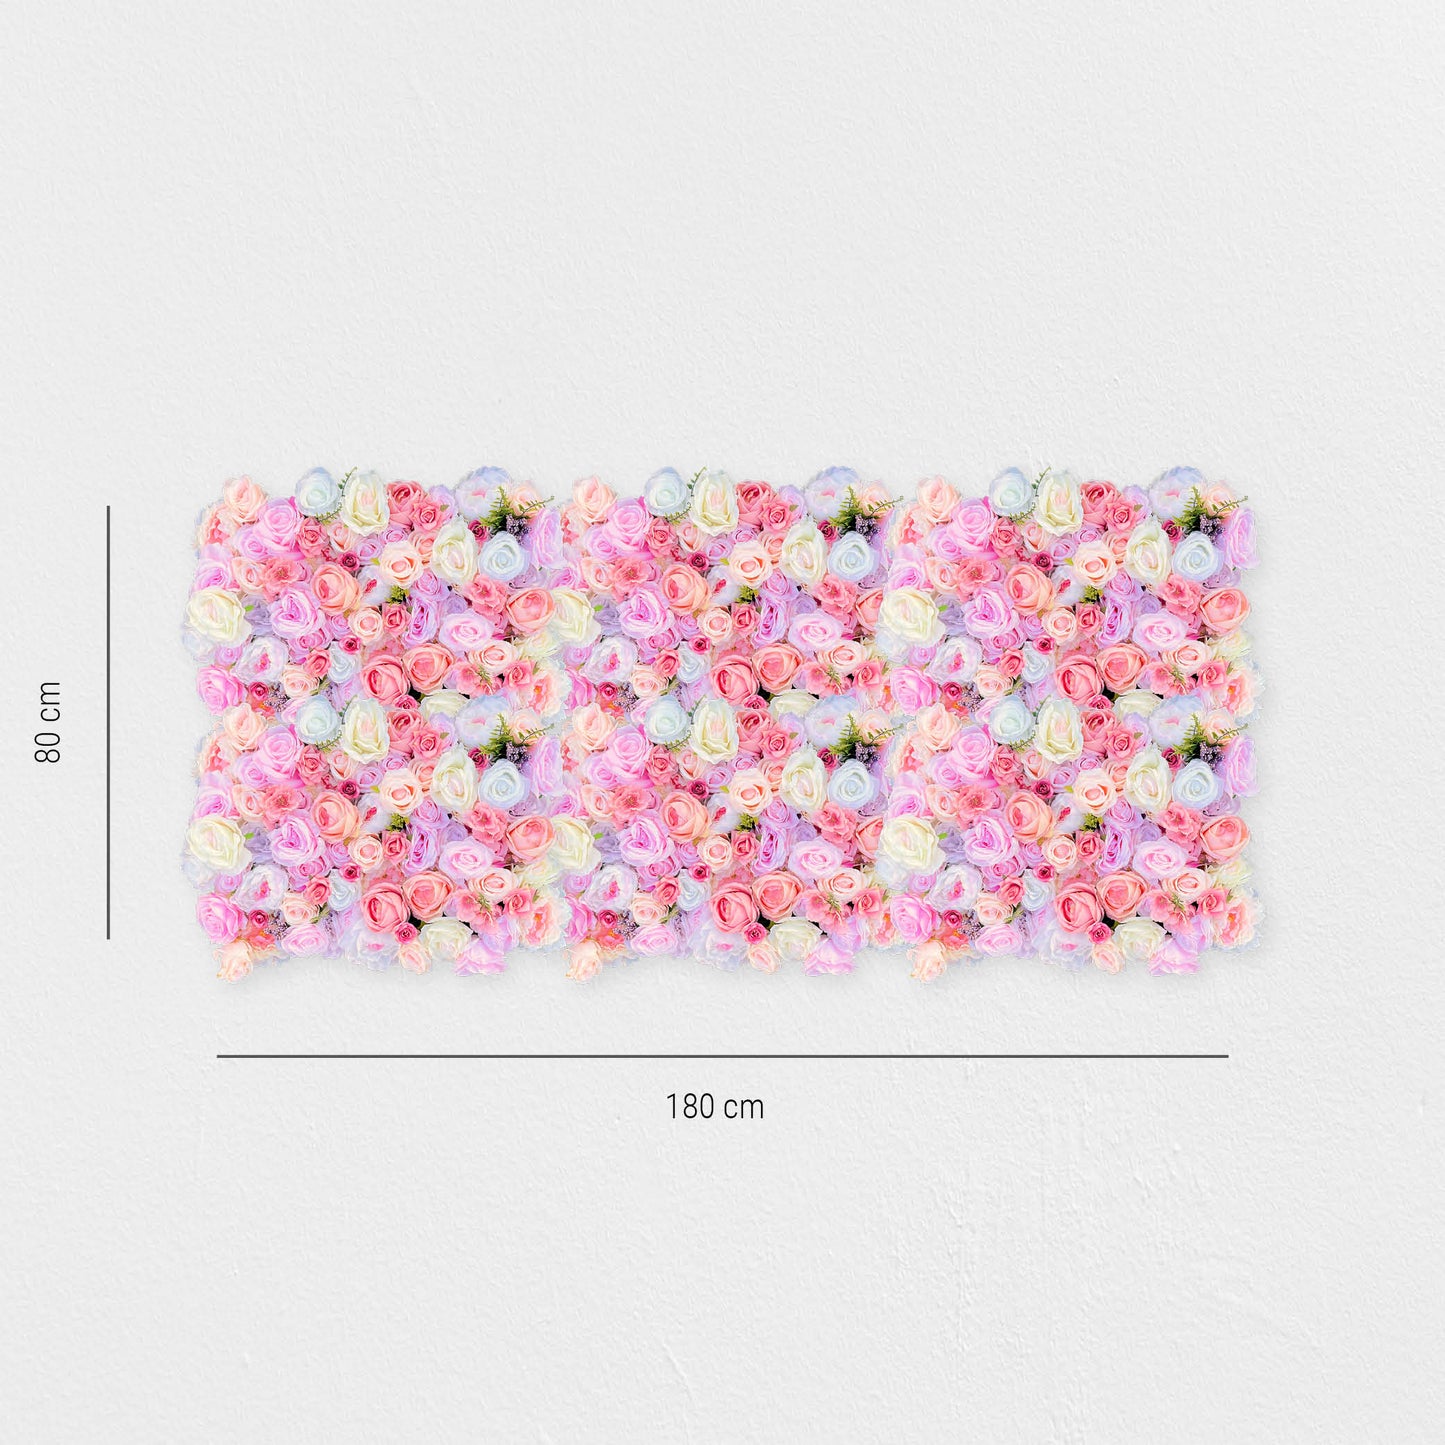 Flower wall "BLOOMYLICIOUS" made of Realtouch artificial plants